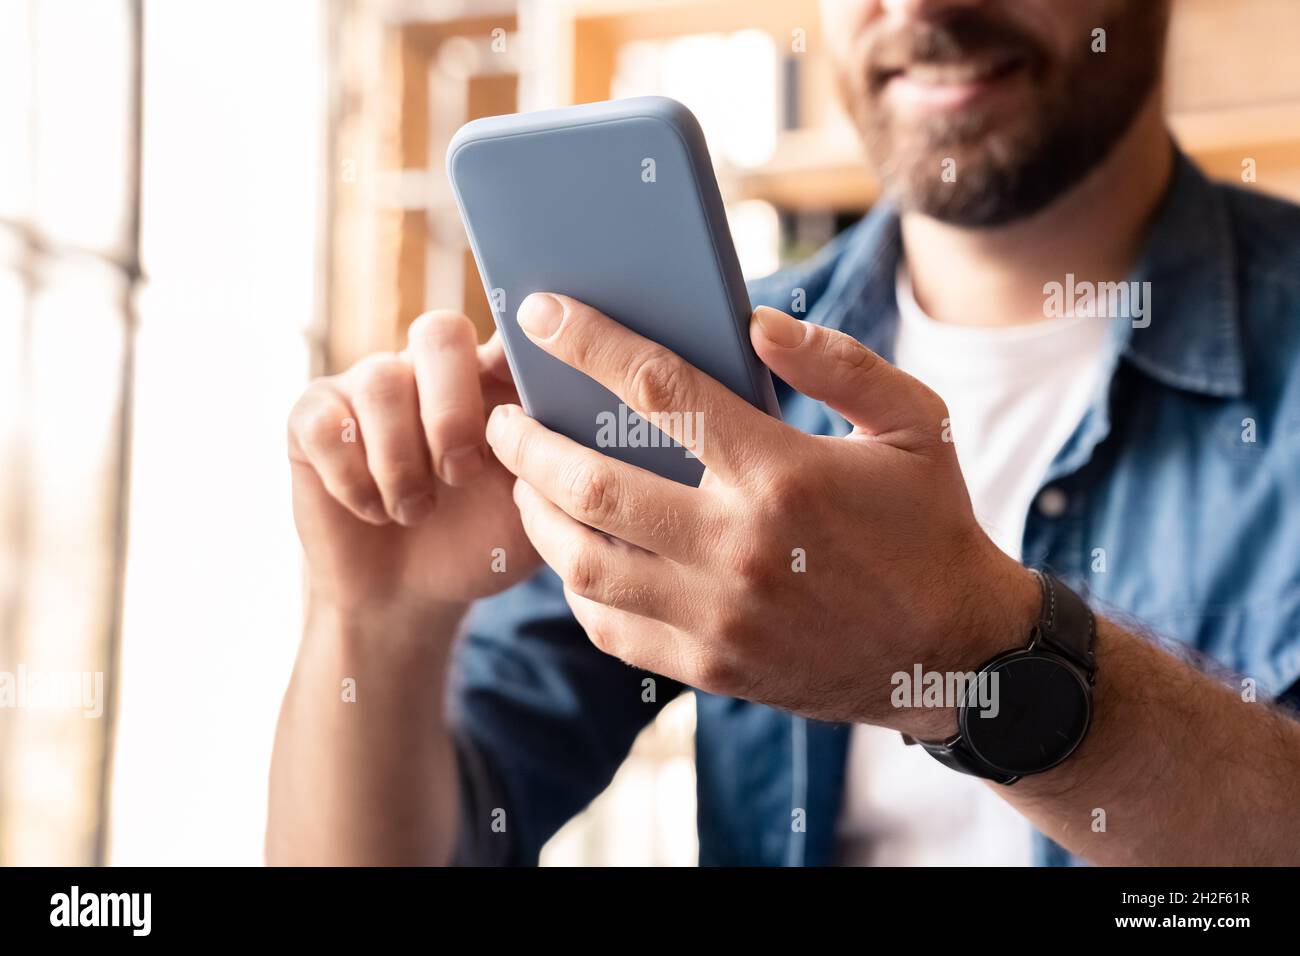 Closeup man using smartphone for social media networking, making video call Stock Photo